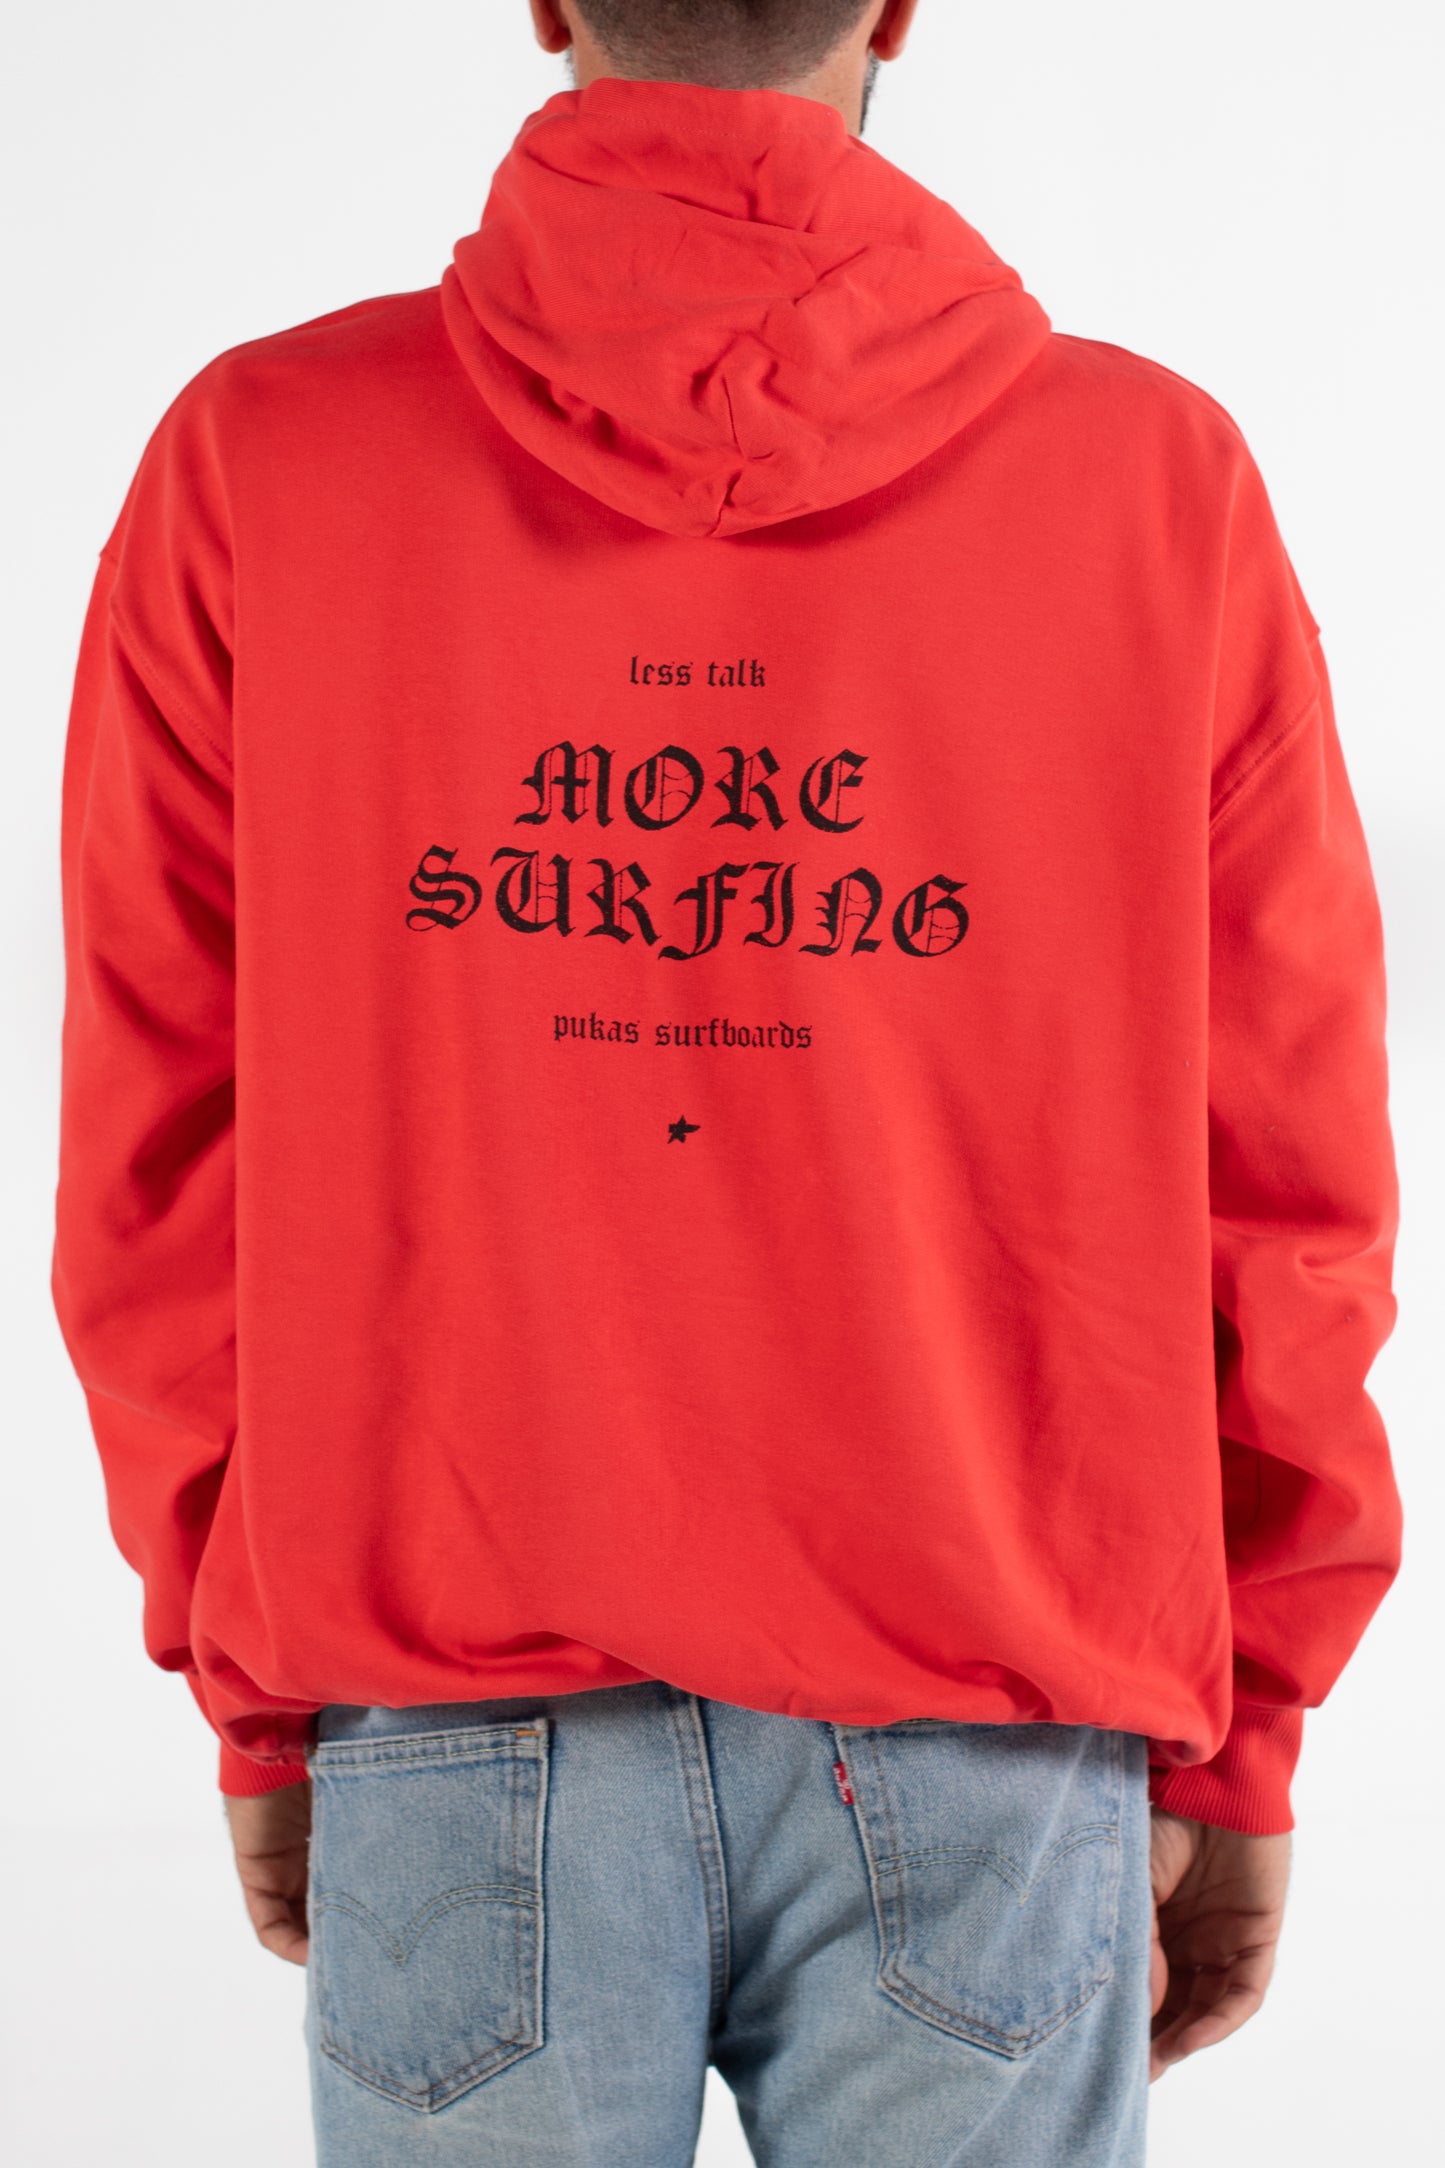 Pukas-Surf-Shop-Surfing-The-Basque-Country-hoodie-man-More-Surfing-bright-red